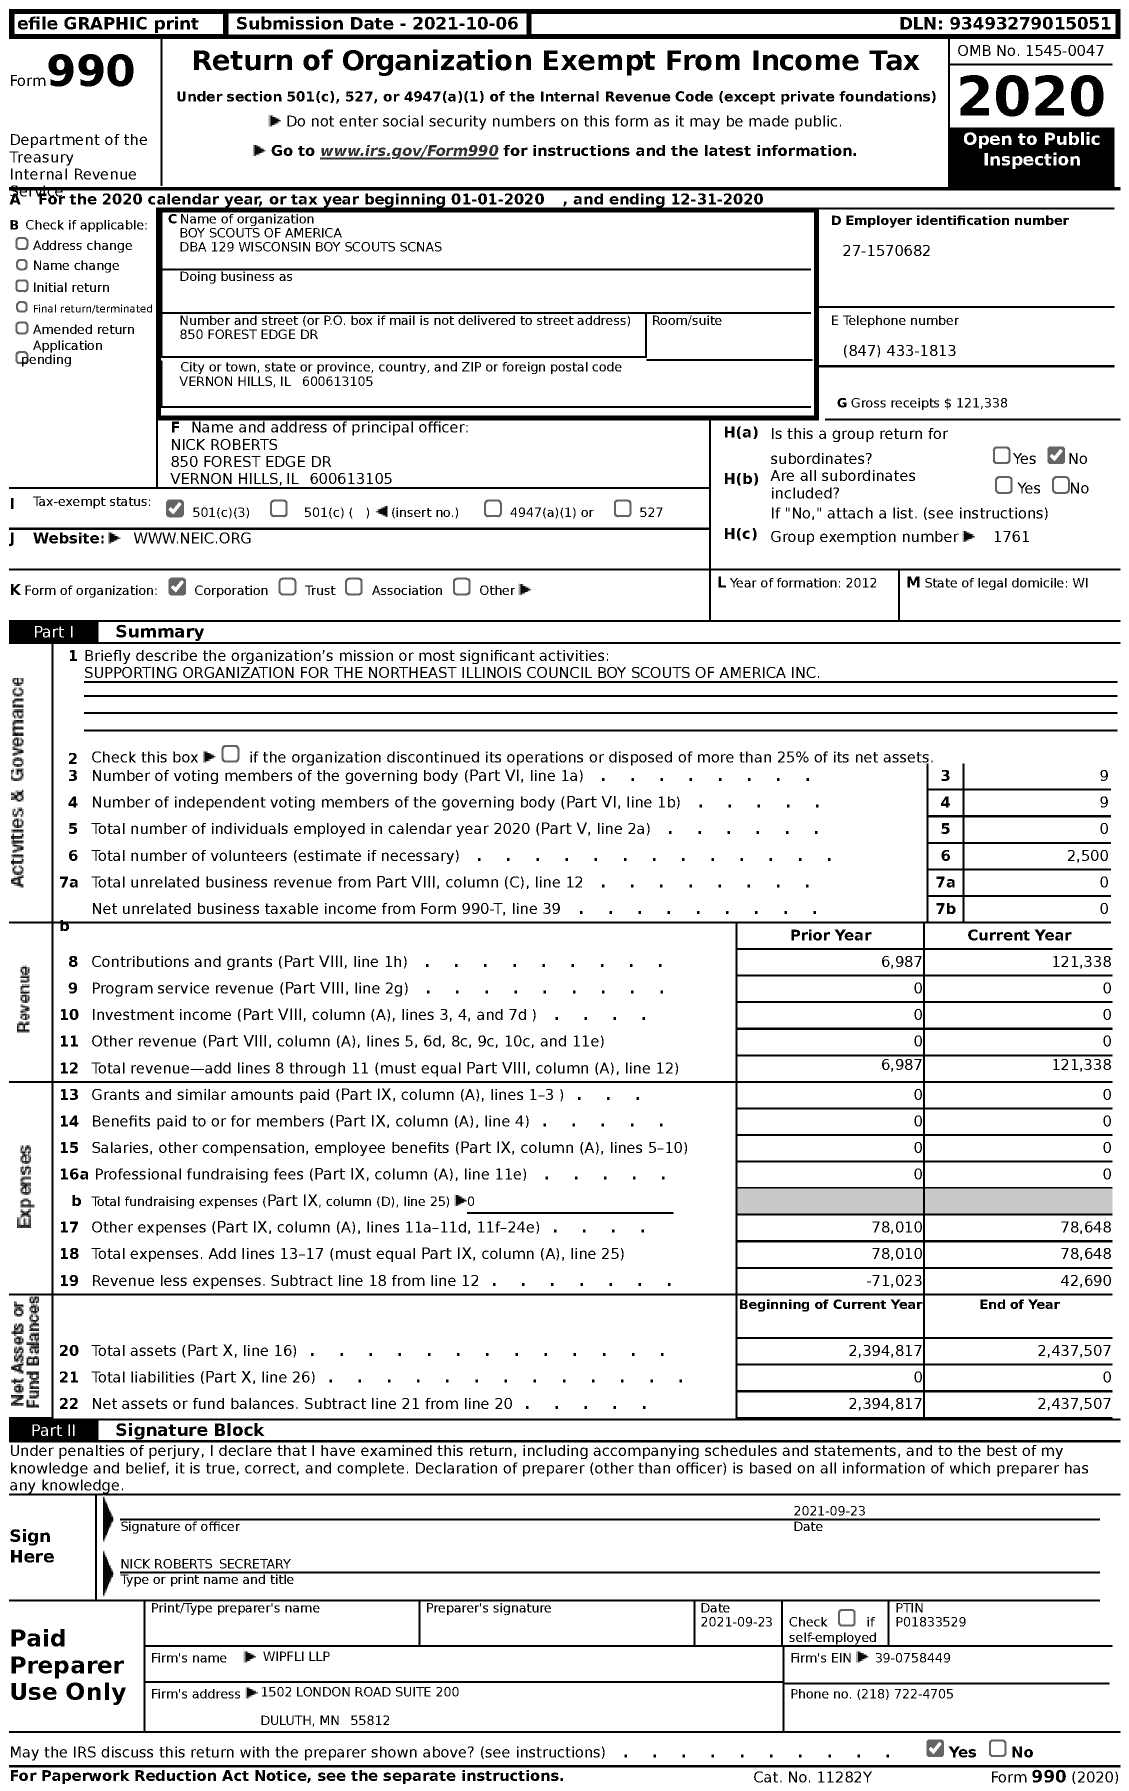 Image of first page of 2020 Form 990 for Boy Scouts of America - 129 Wisconsin Boy Scouts Scnas